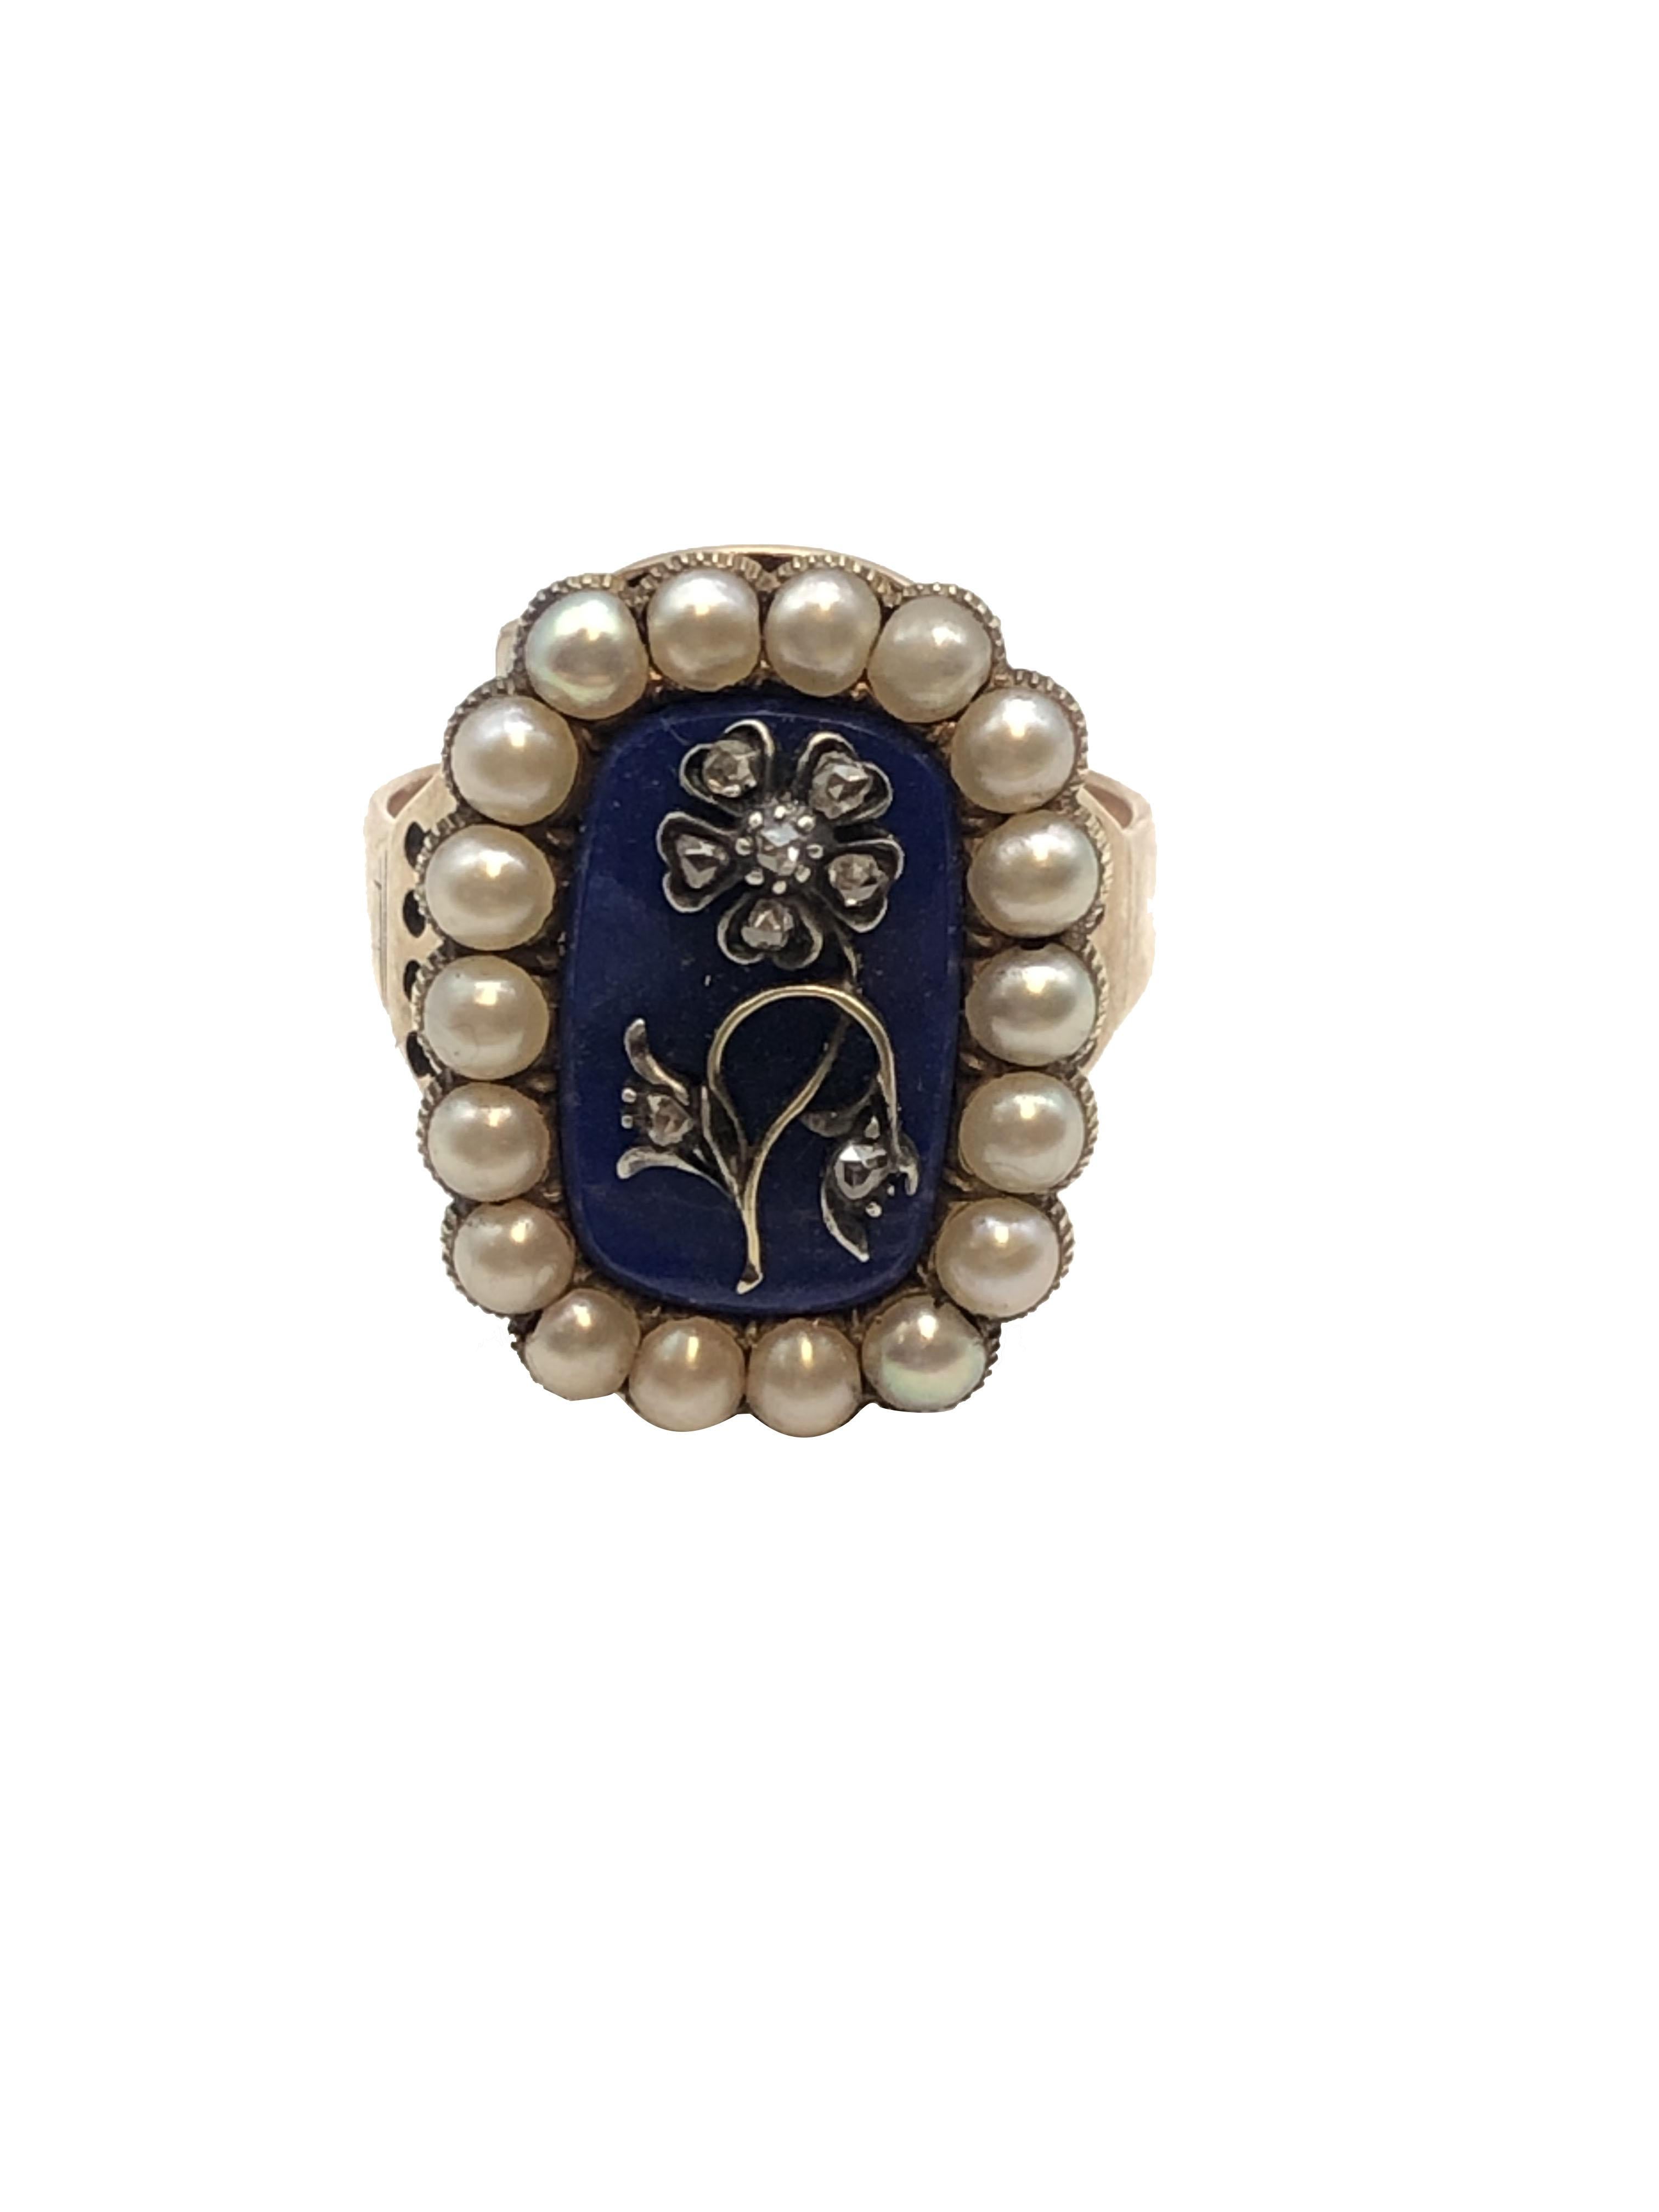 Circa 1850s Ladies Ring, the top measuring 7/8 X 5/8 inch with a Center of Lapis Lazuli mounted with a silver flower set with Rose cut Diamonds and further surrounded by Natural Pearls. Finger size 11. 